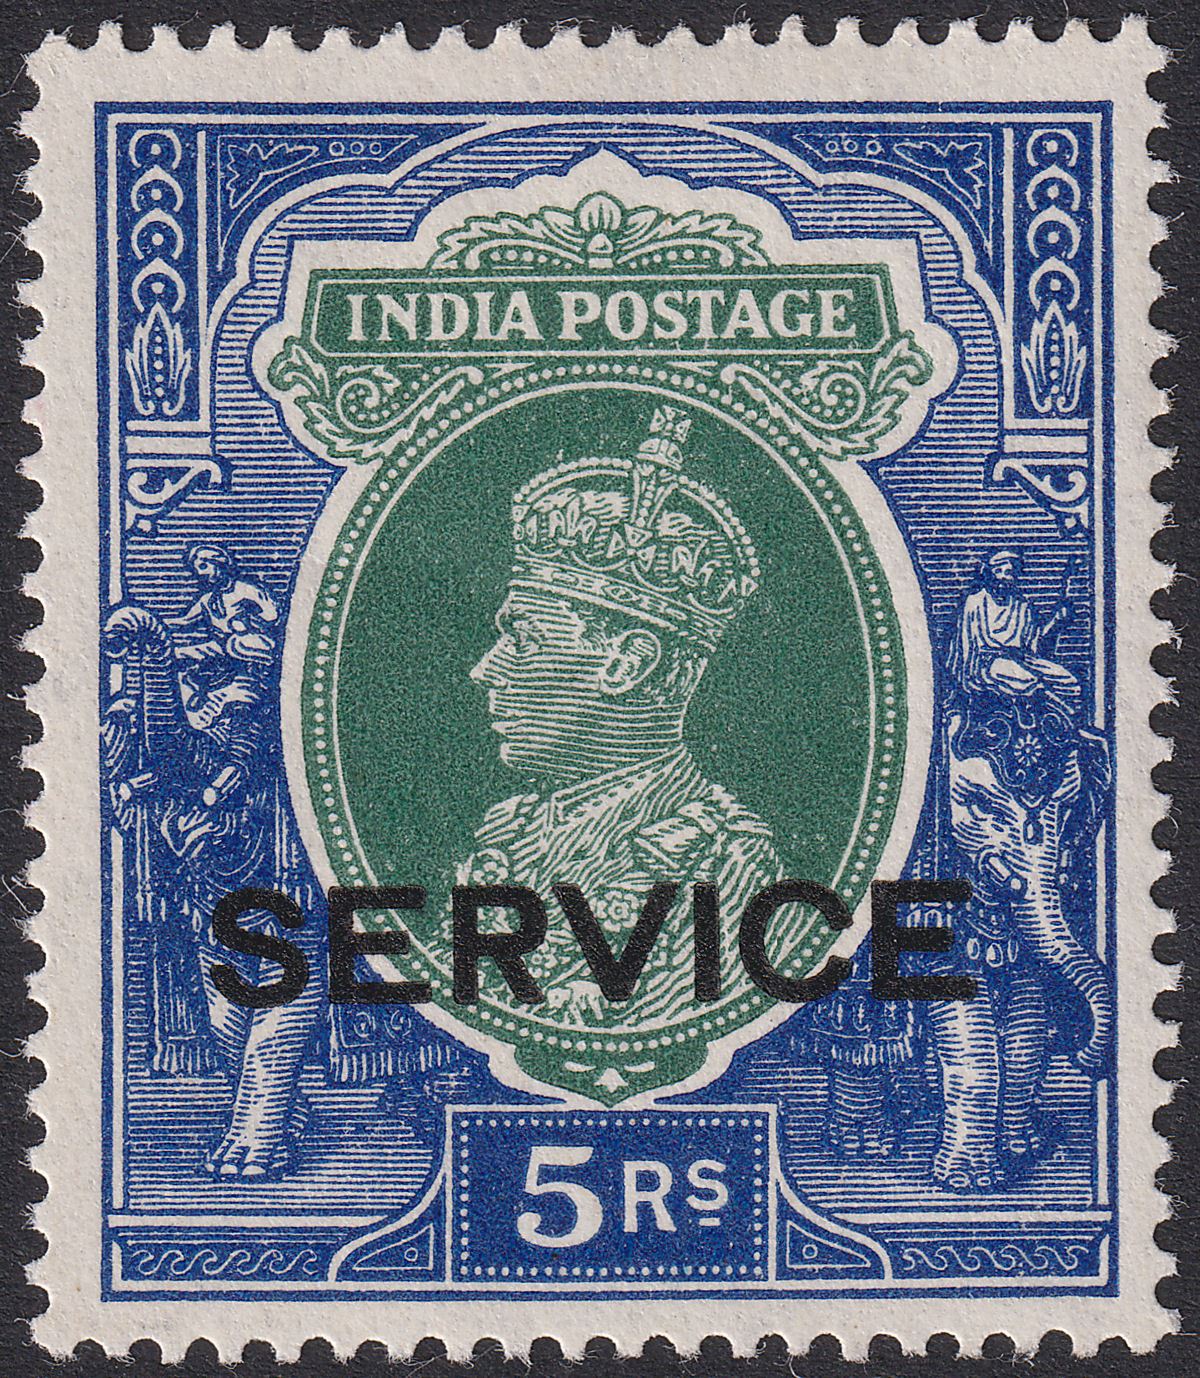 India 1938 KGVI Official Overprint 5r wmk Inverted Mint SG O137w cat £160